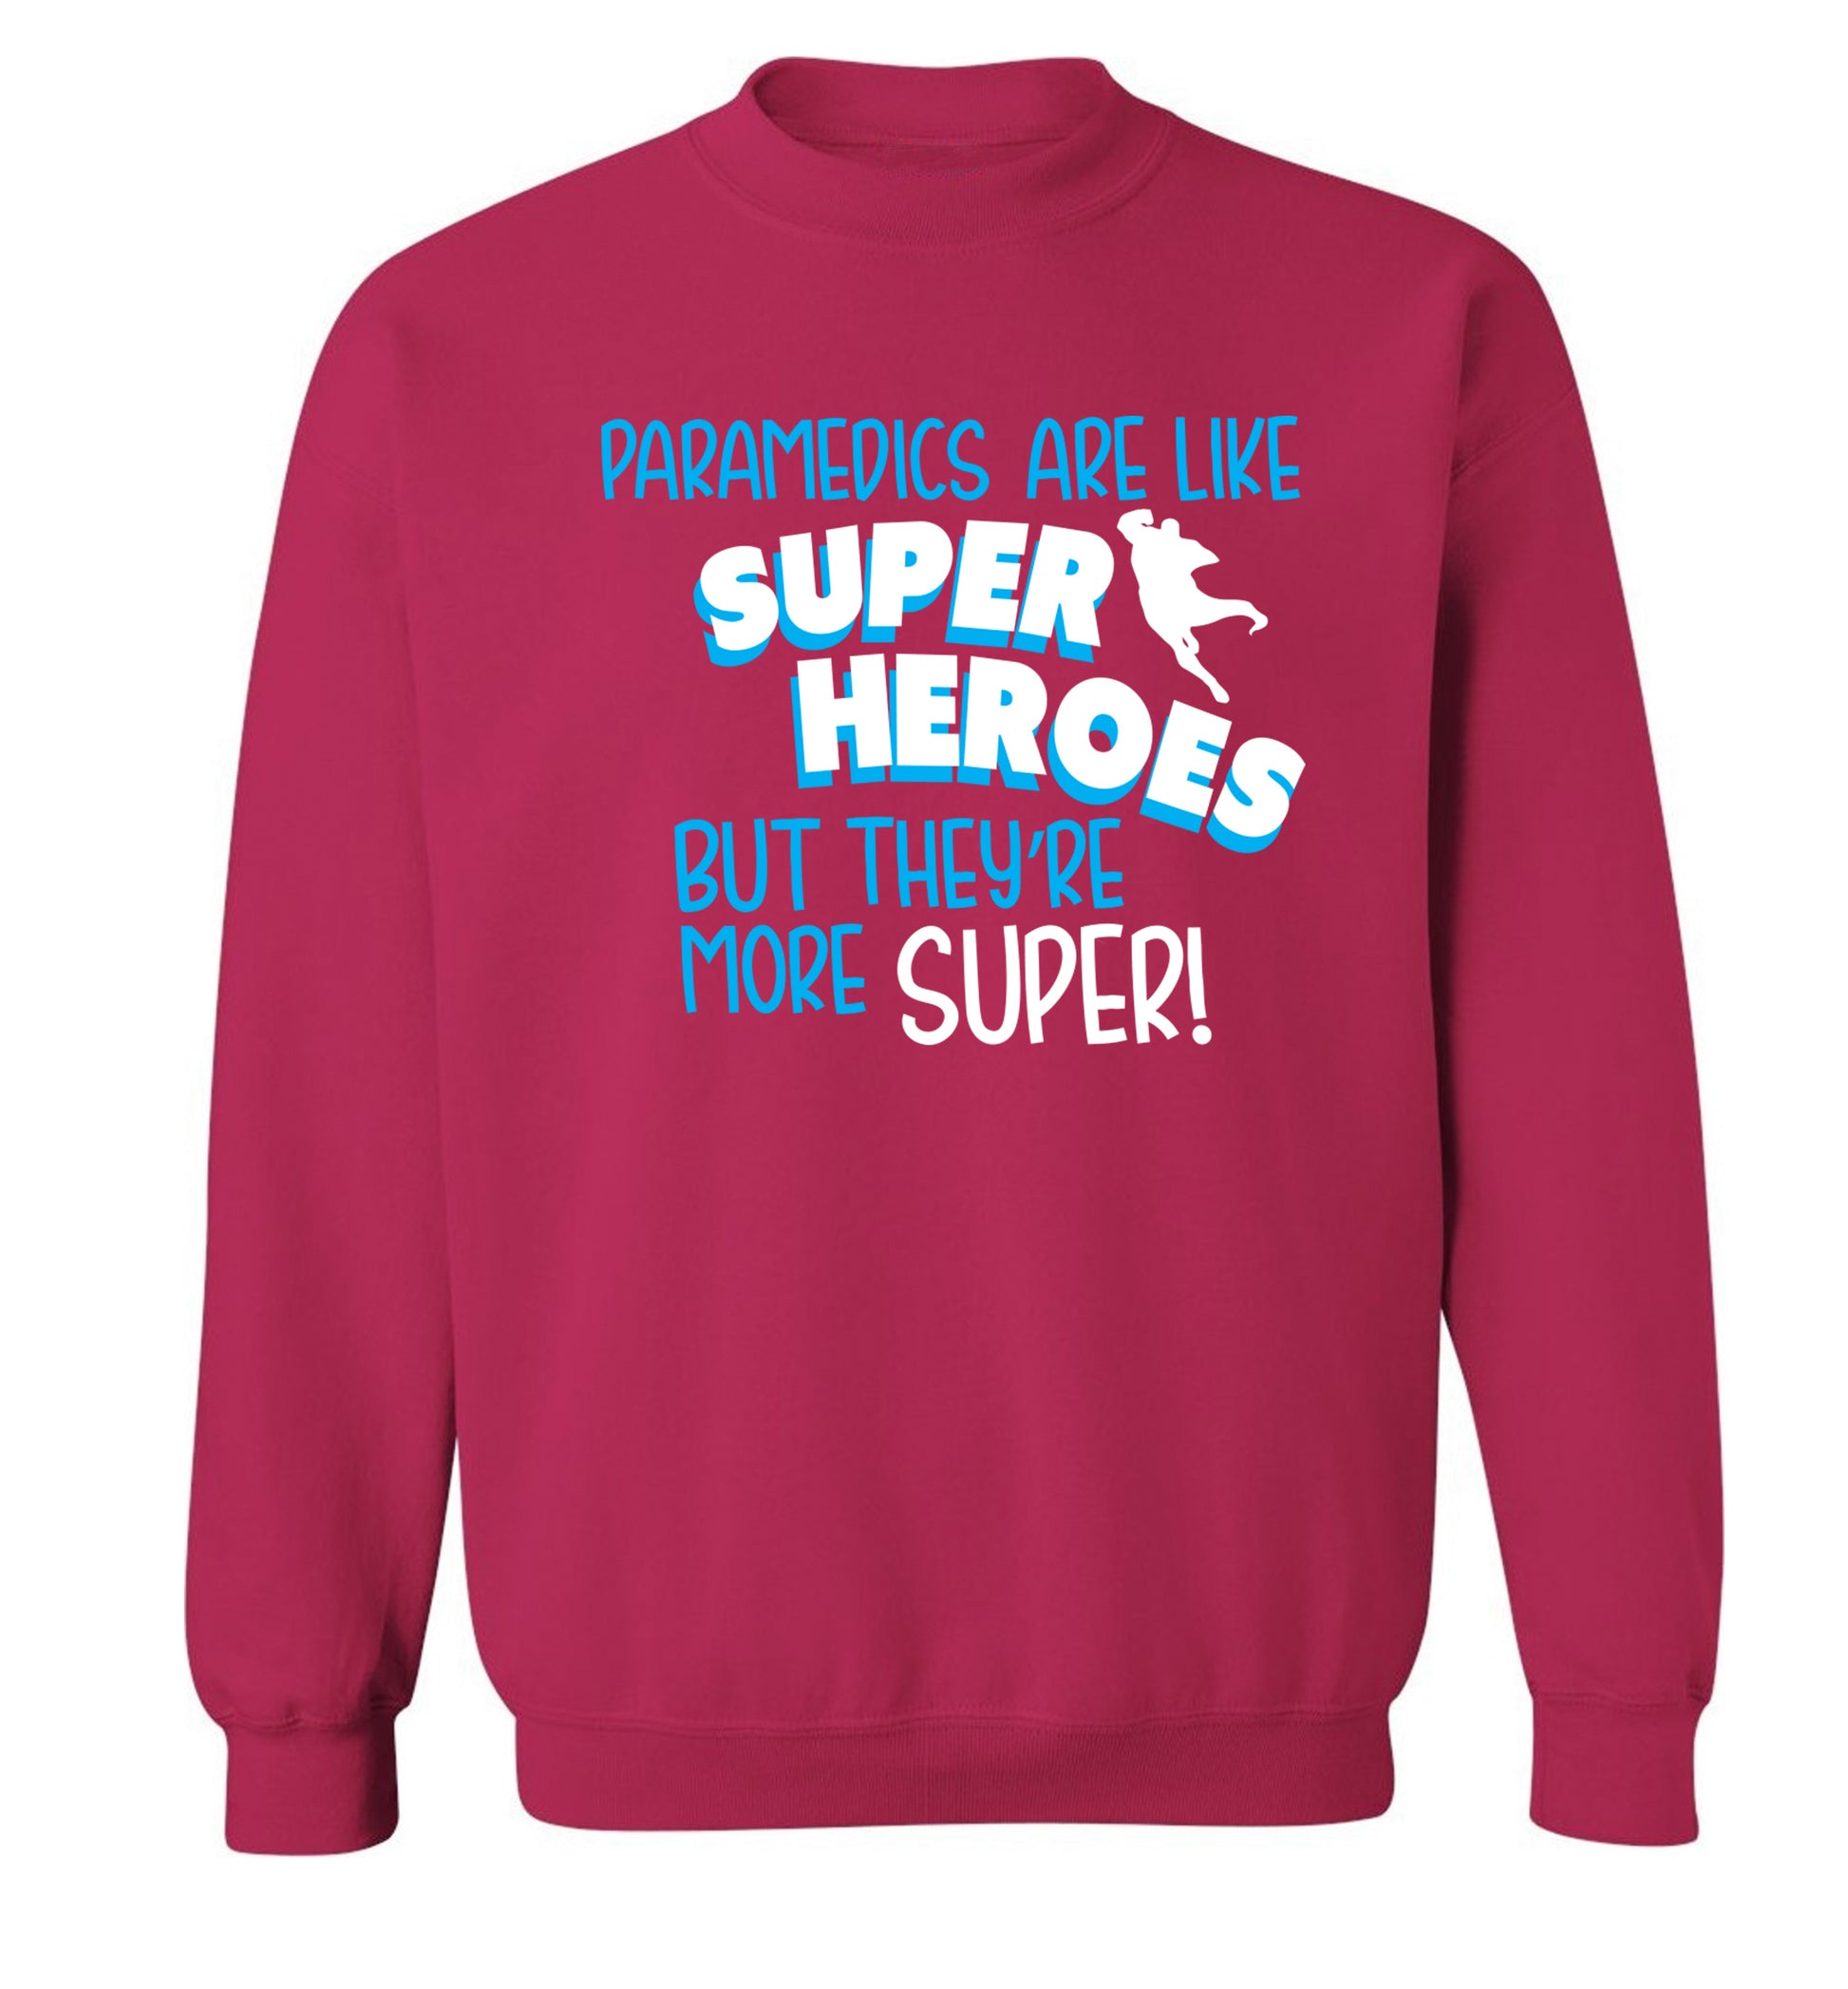 Paramedics are like superheros but they're more super Adult's unisex pink Sweater 2XL